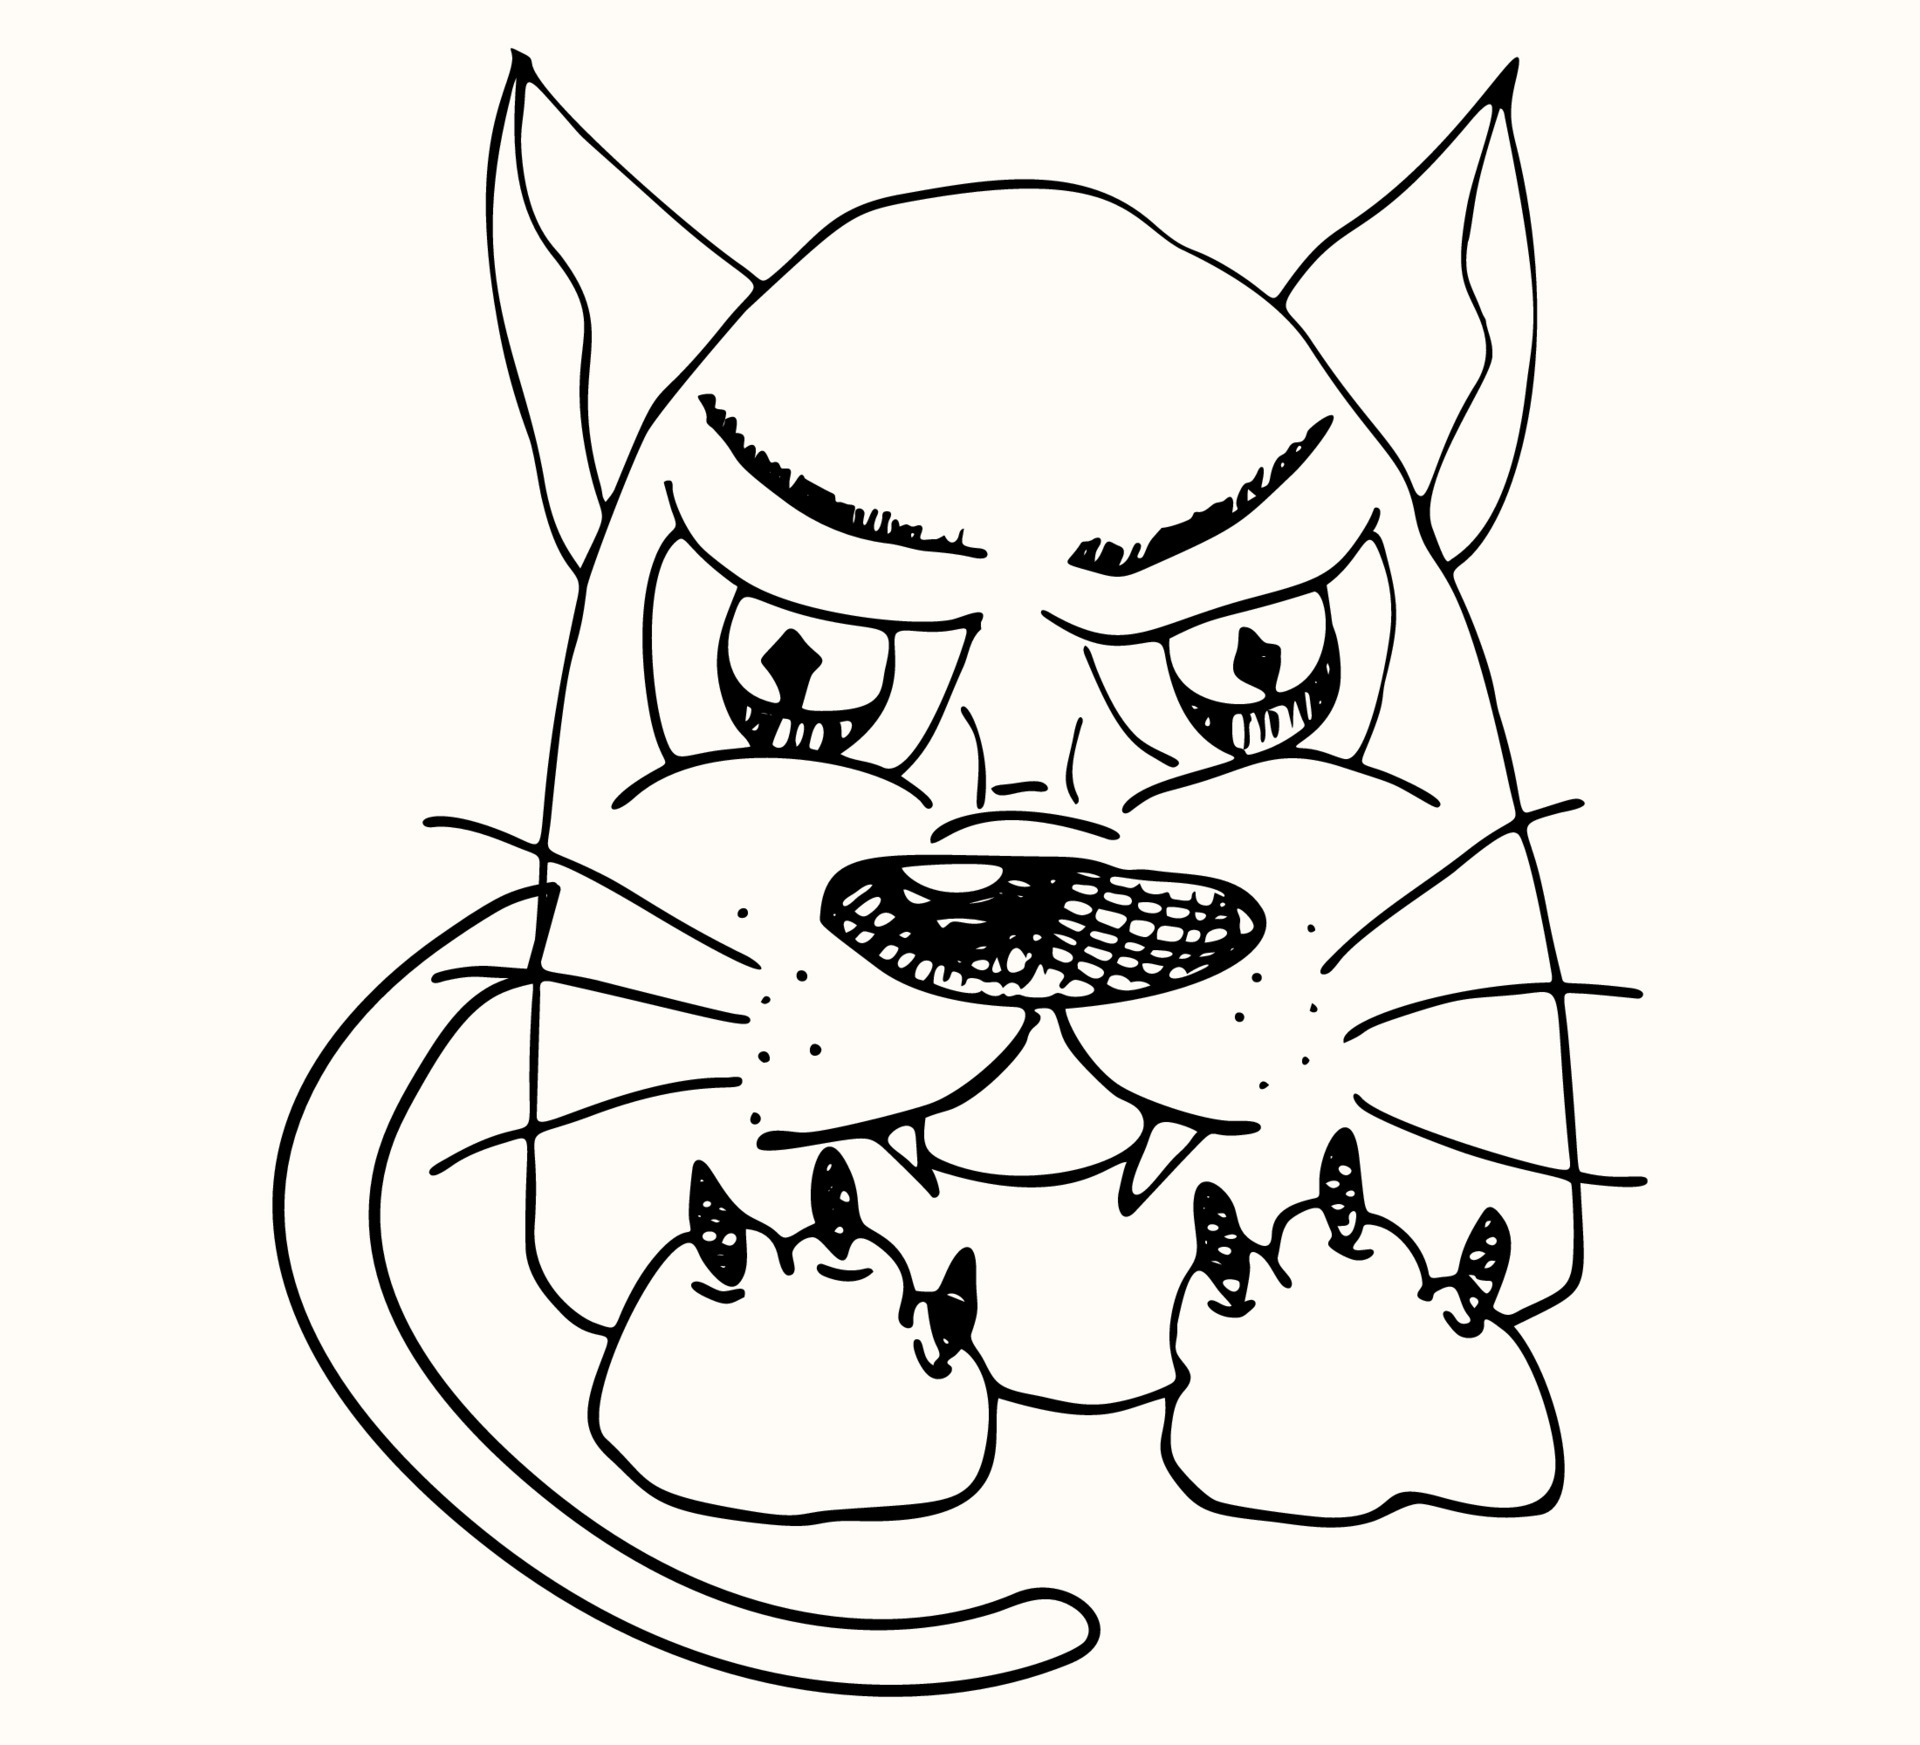 How to draw an angry cat 